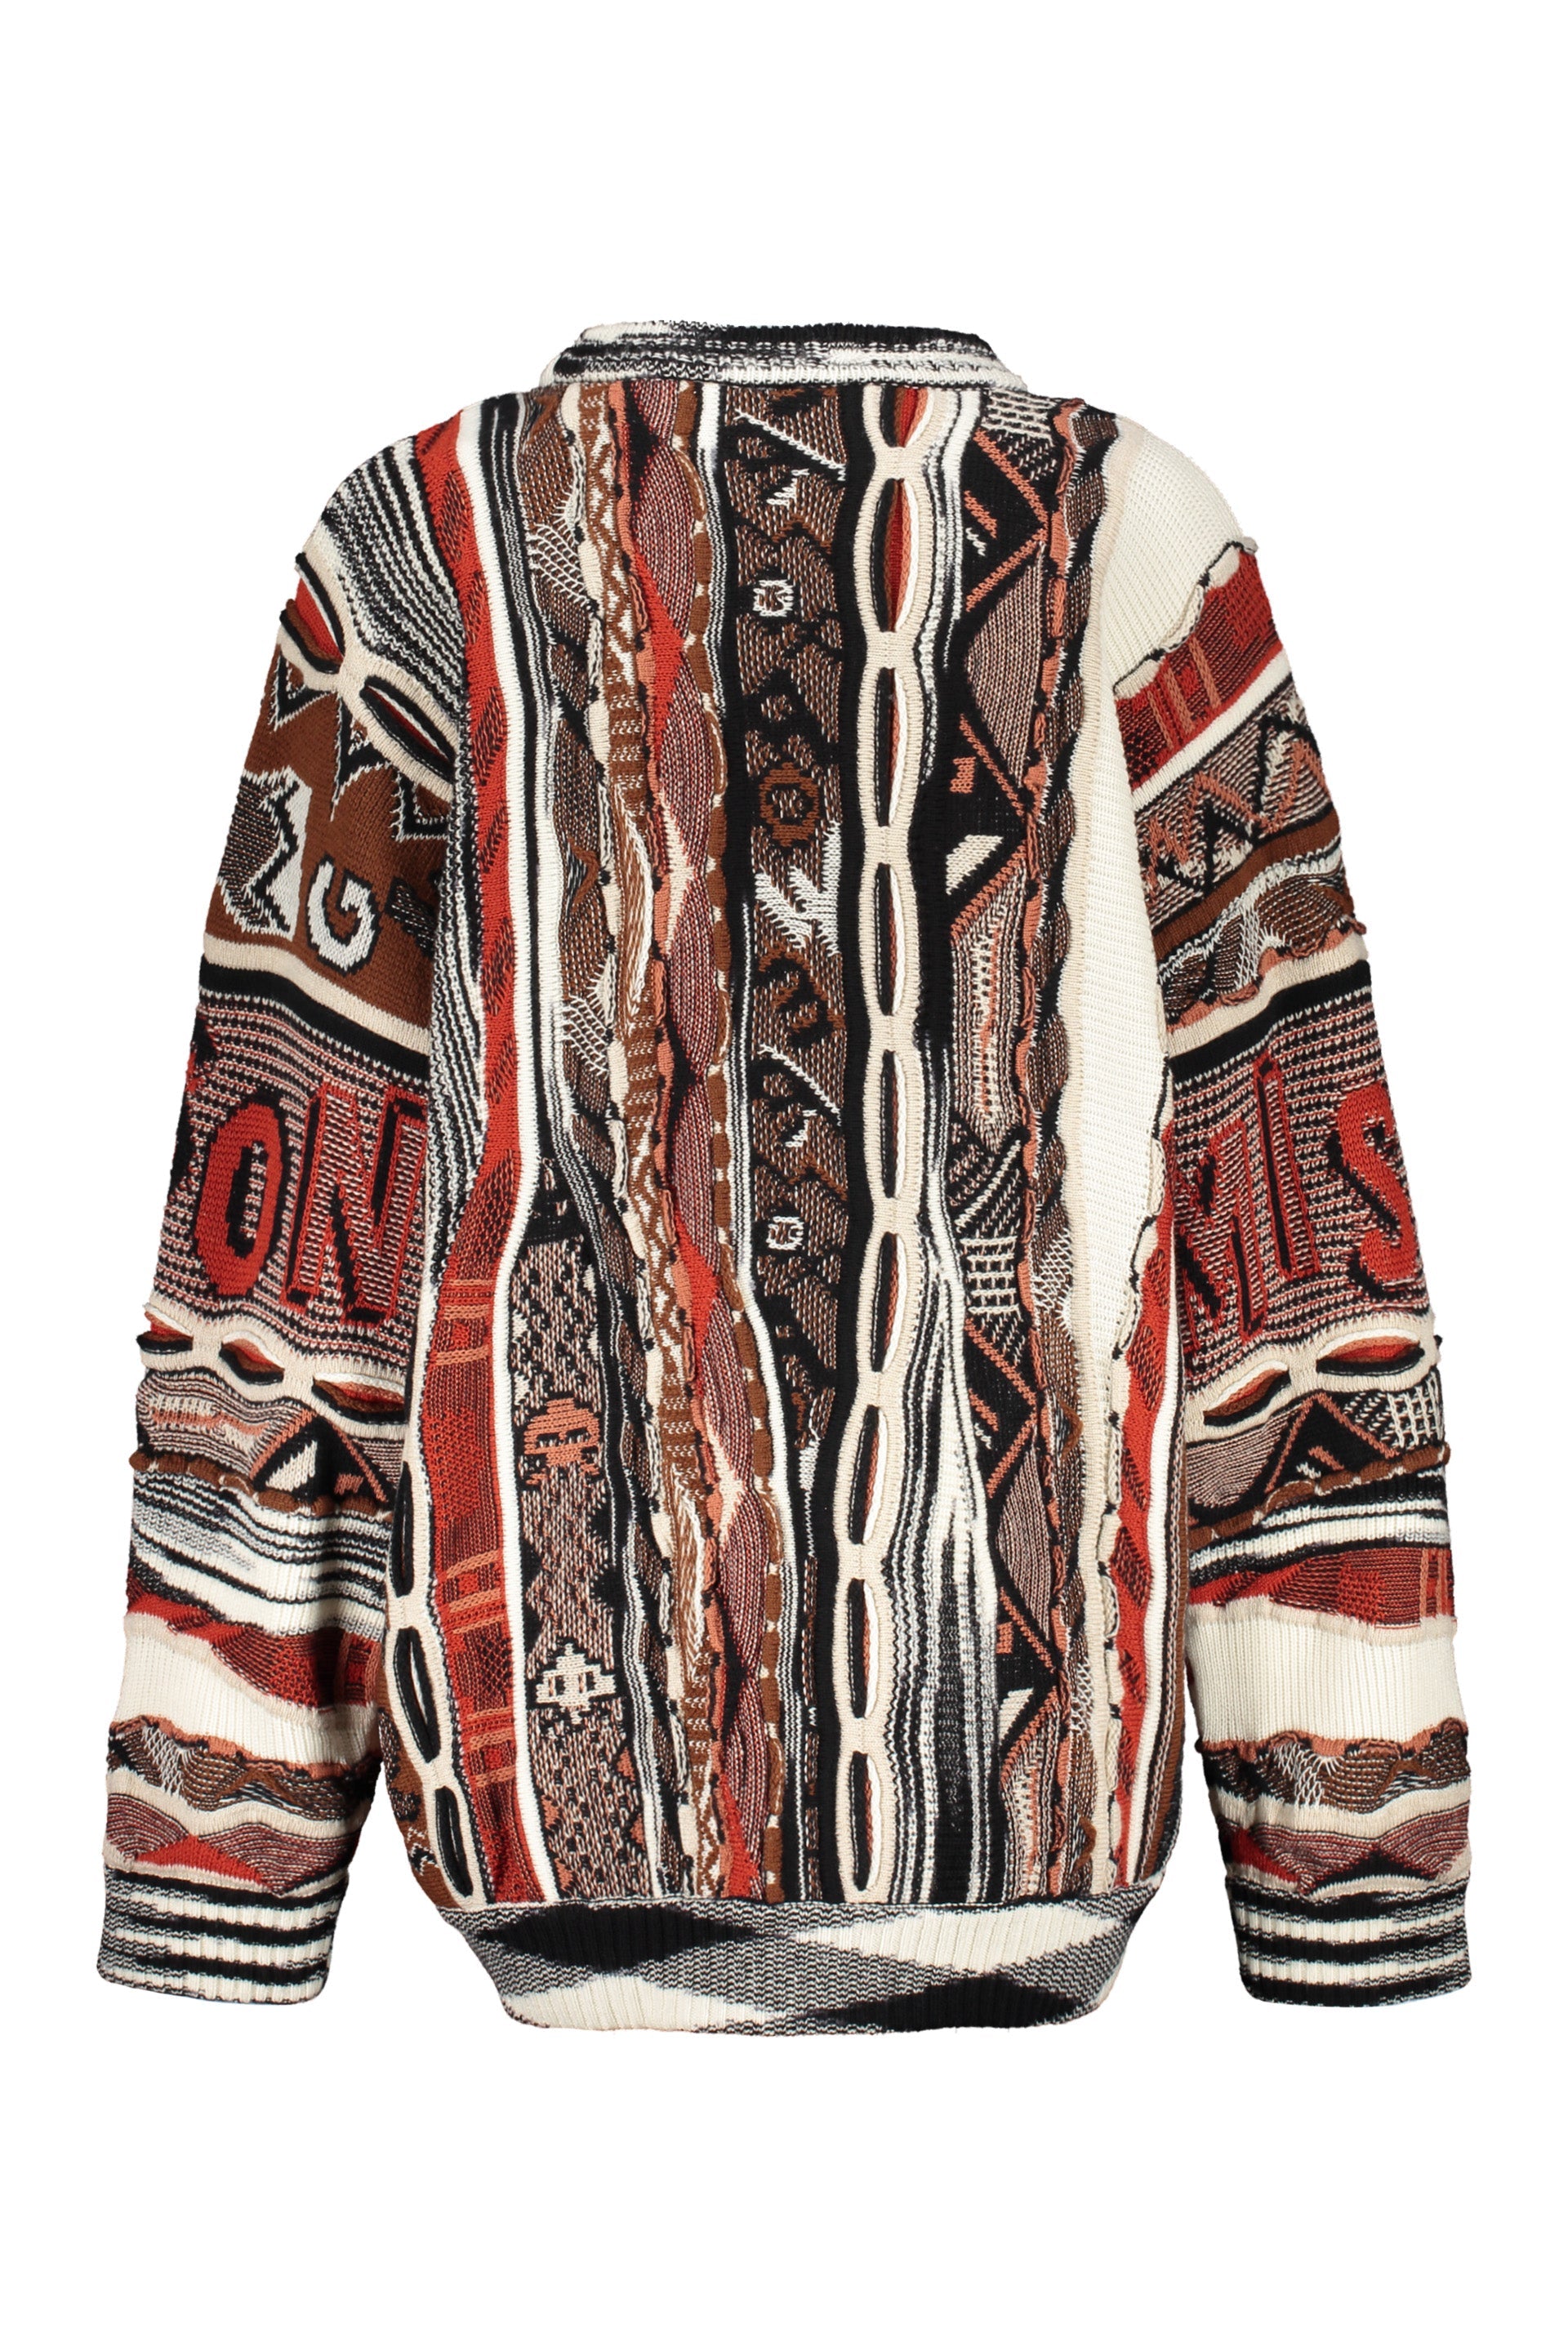 Missoni-OUTLET-SALE-Crew-neck-wool-sweater-Strick-S-ARCHIVE-COLLECTION-2.jpg